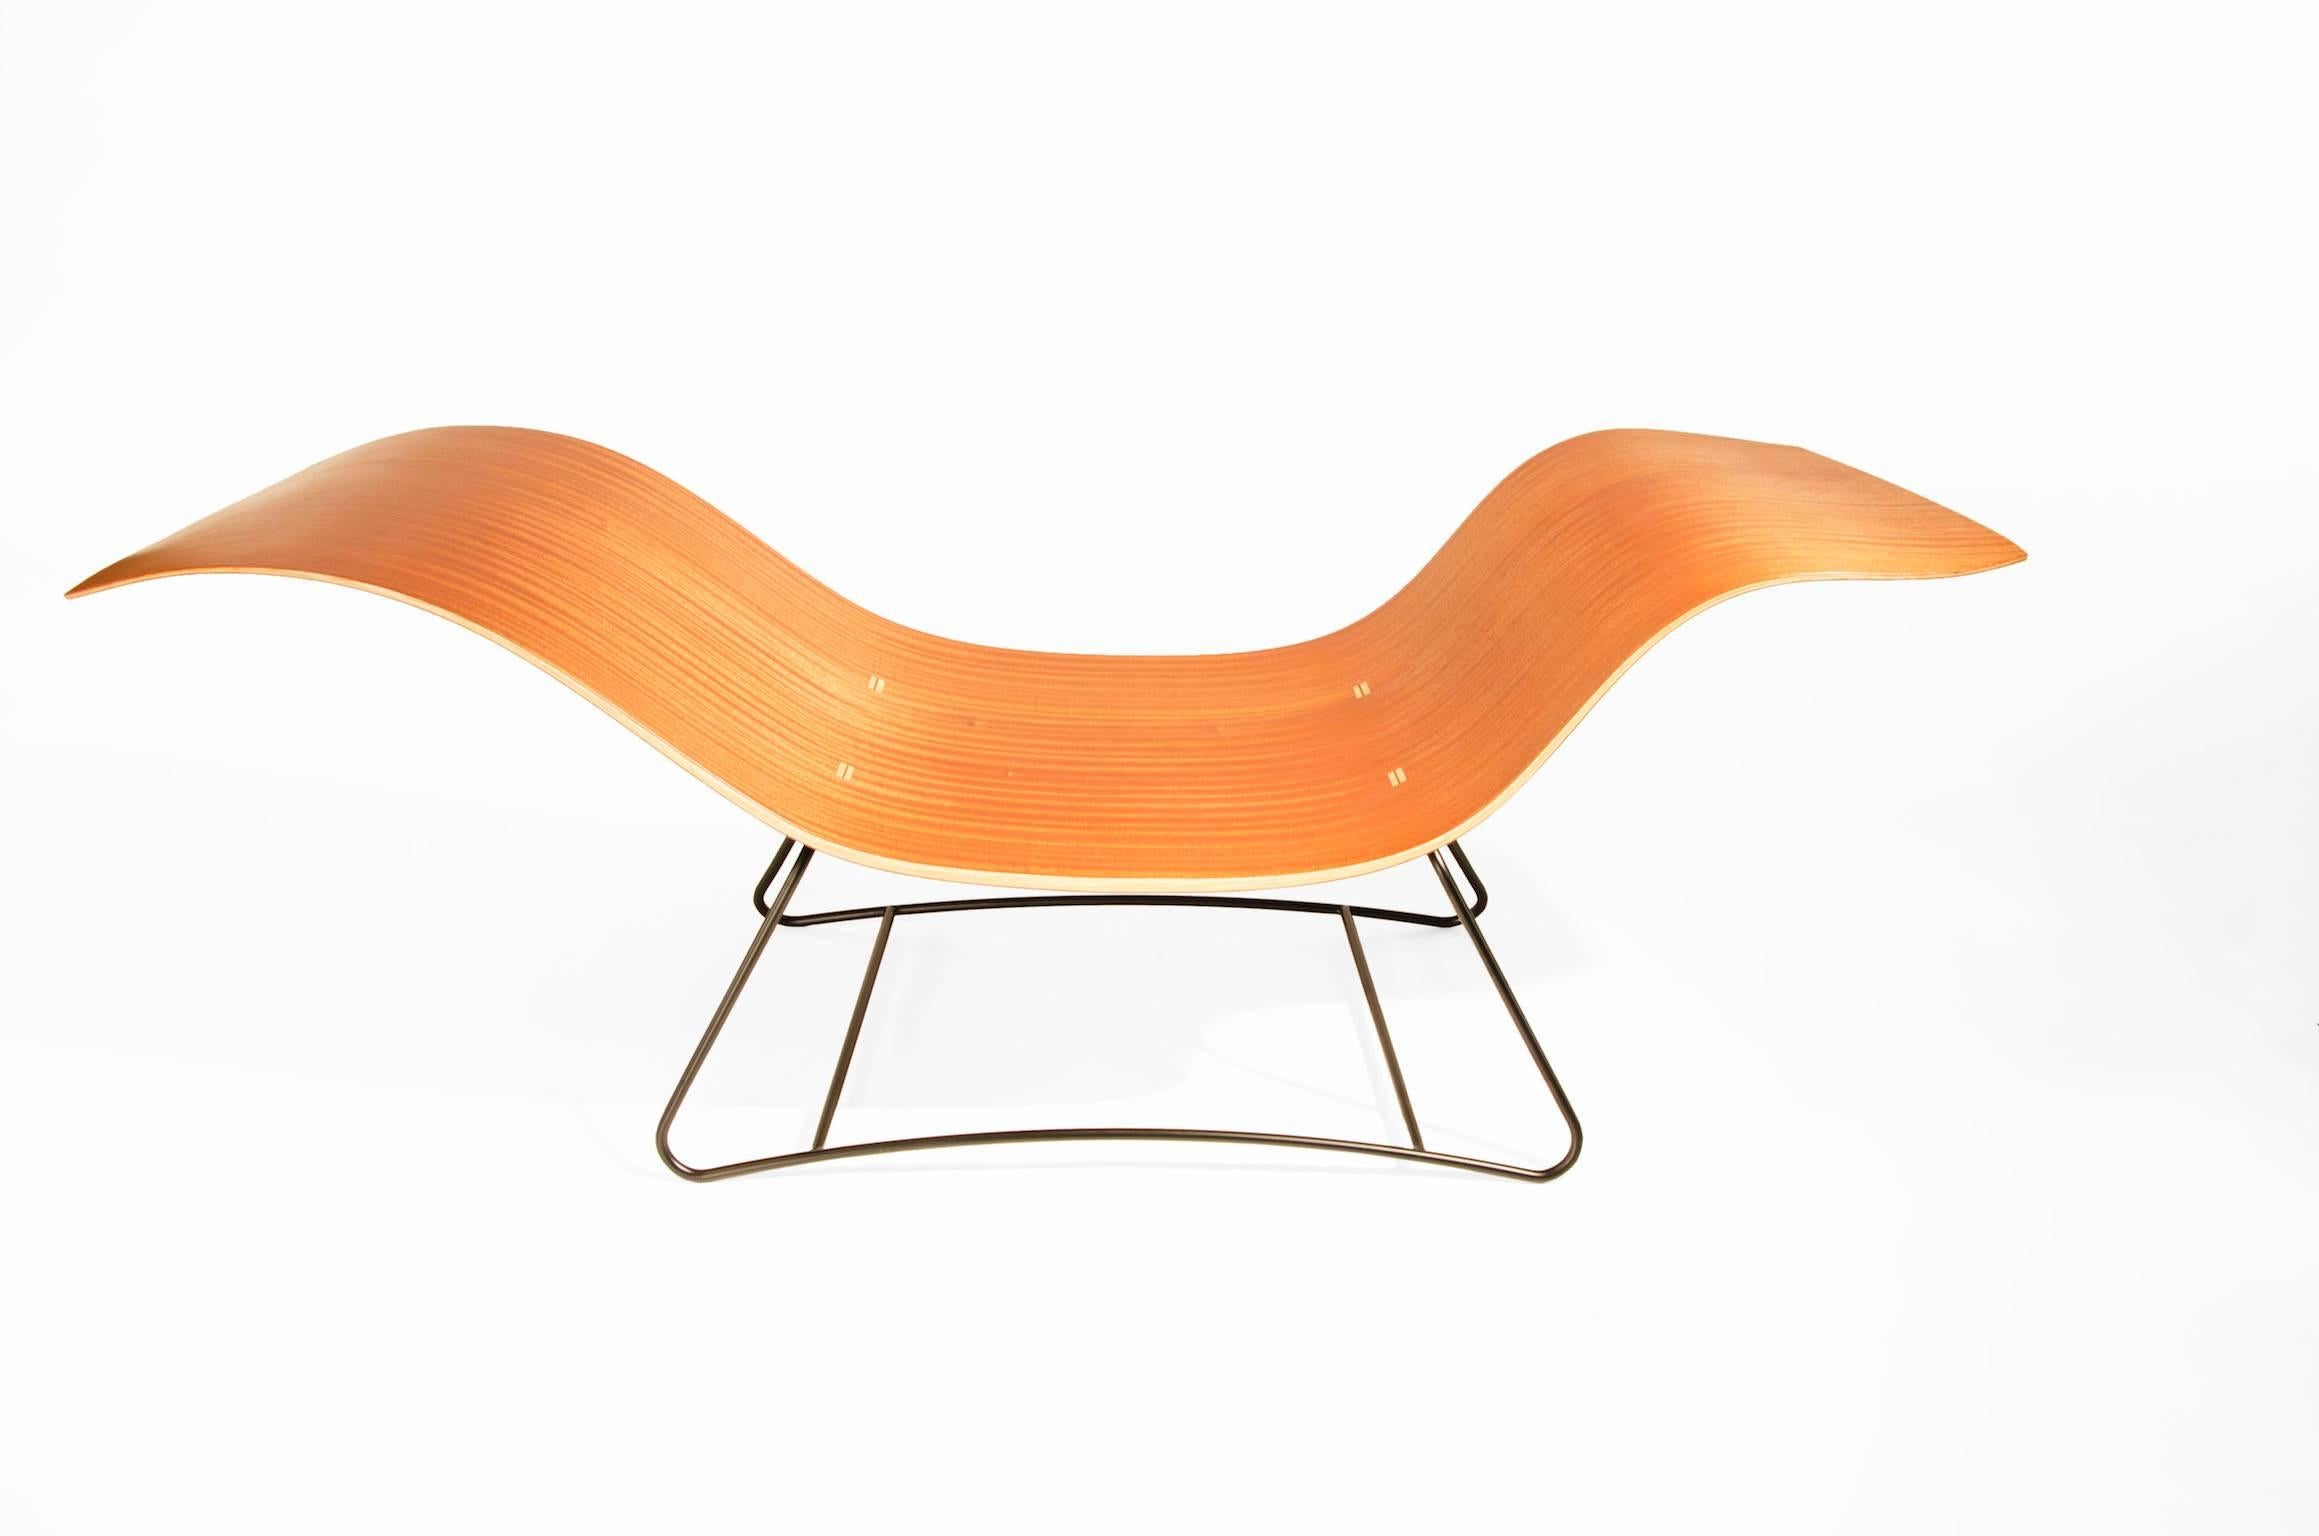 This lounge chair is constructed of a complex wood and composite bent lamination process. It's asymmetrical design is perfect for finding just the right place for you to sit or lounge. This lounge is inspired by the feeling of being in the landscape